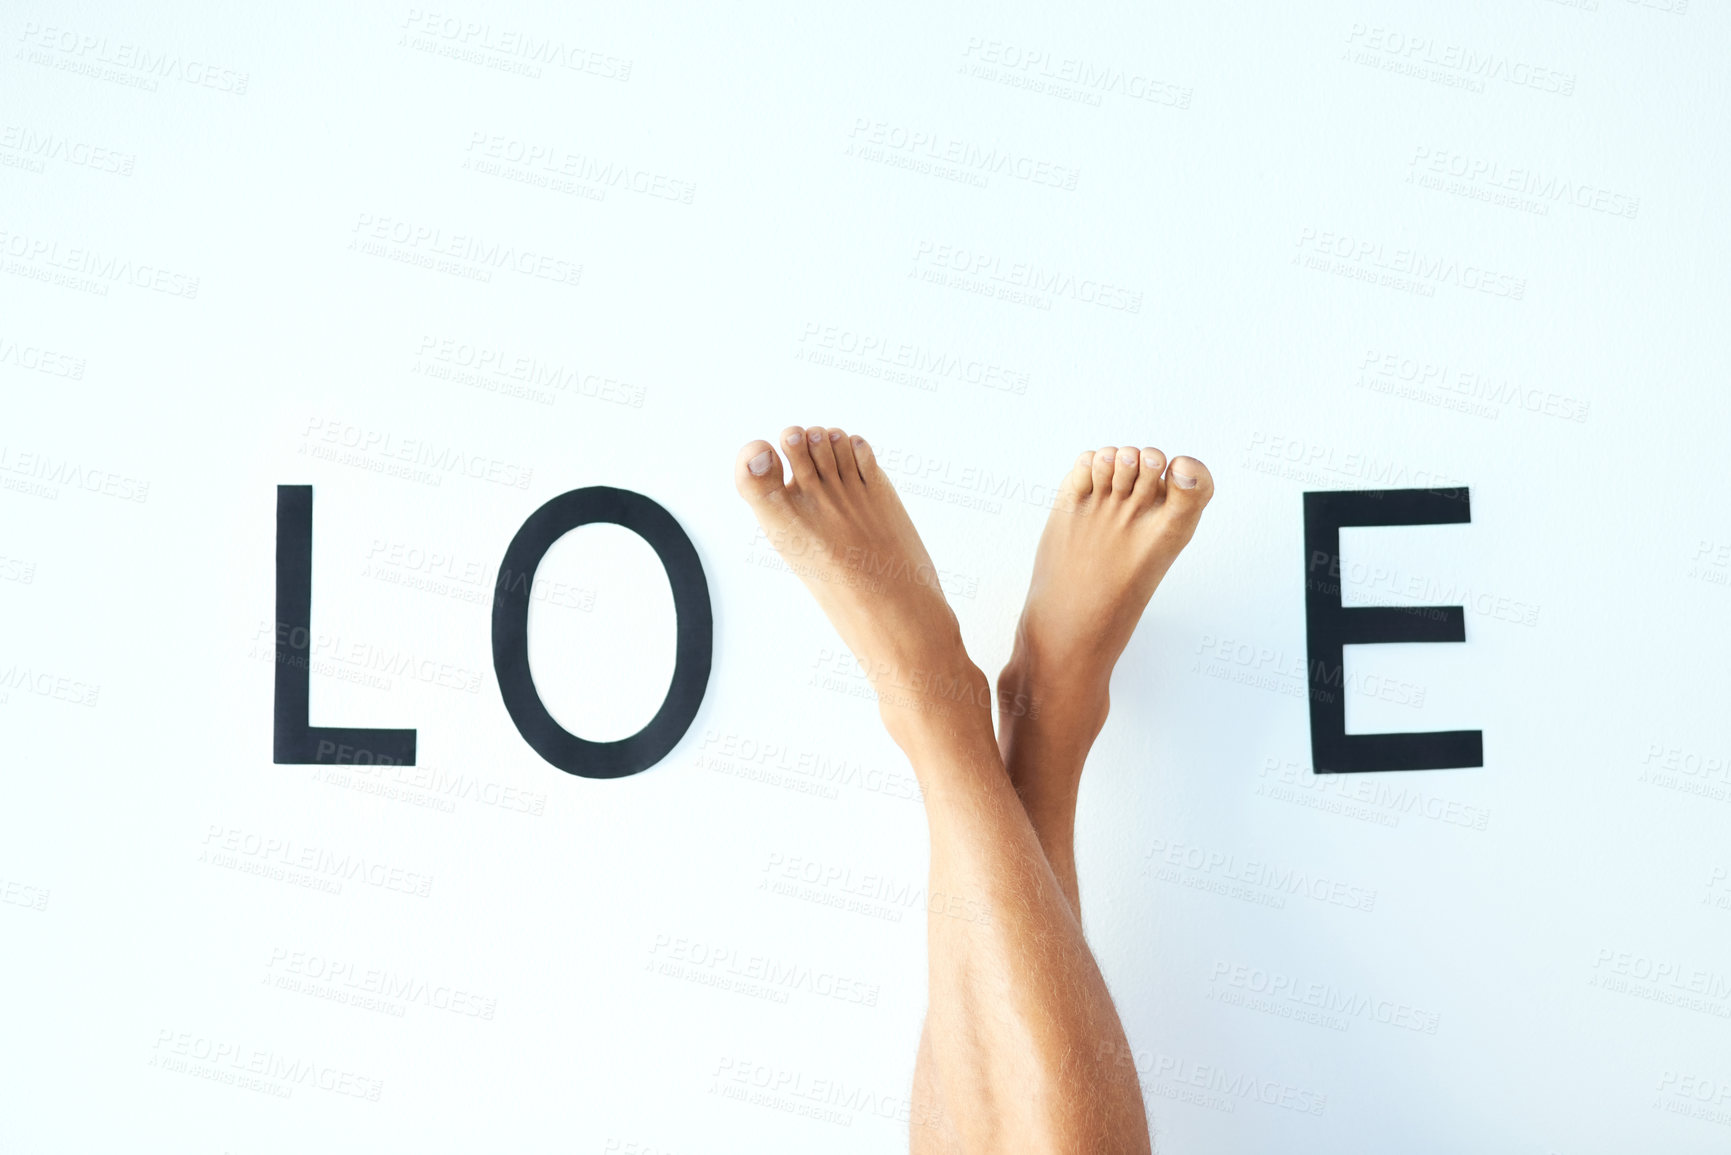 Buy stock photo Studio shot of an unrecognizable man's crossed legs with his feet forming the letter 